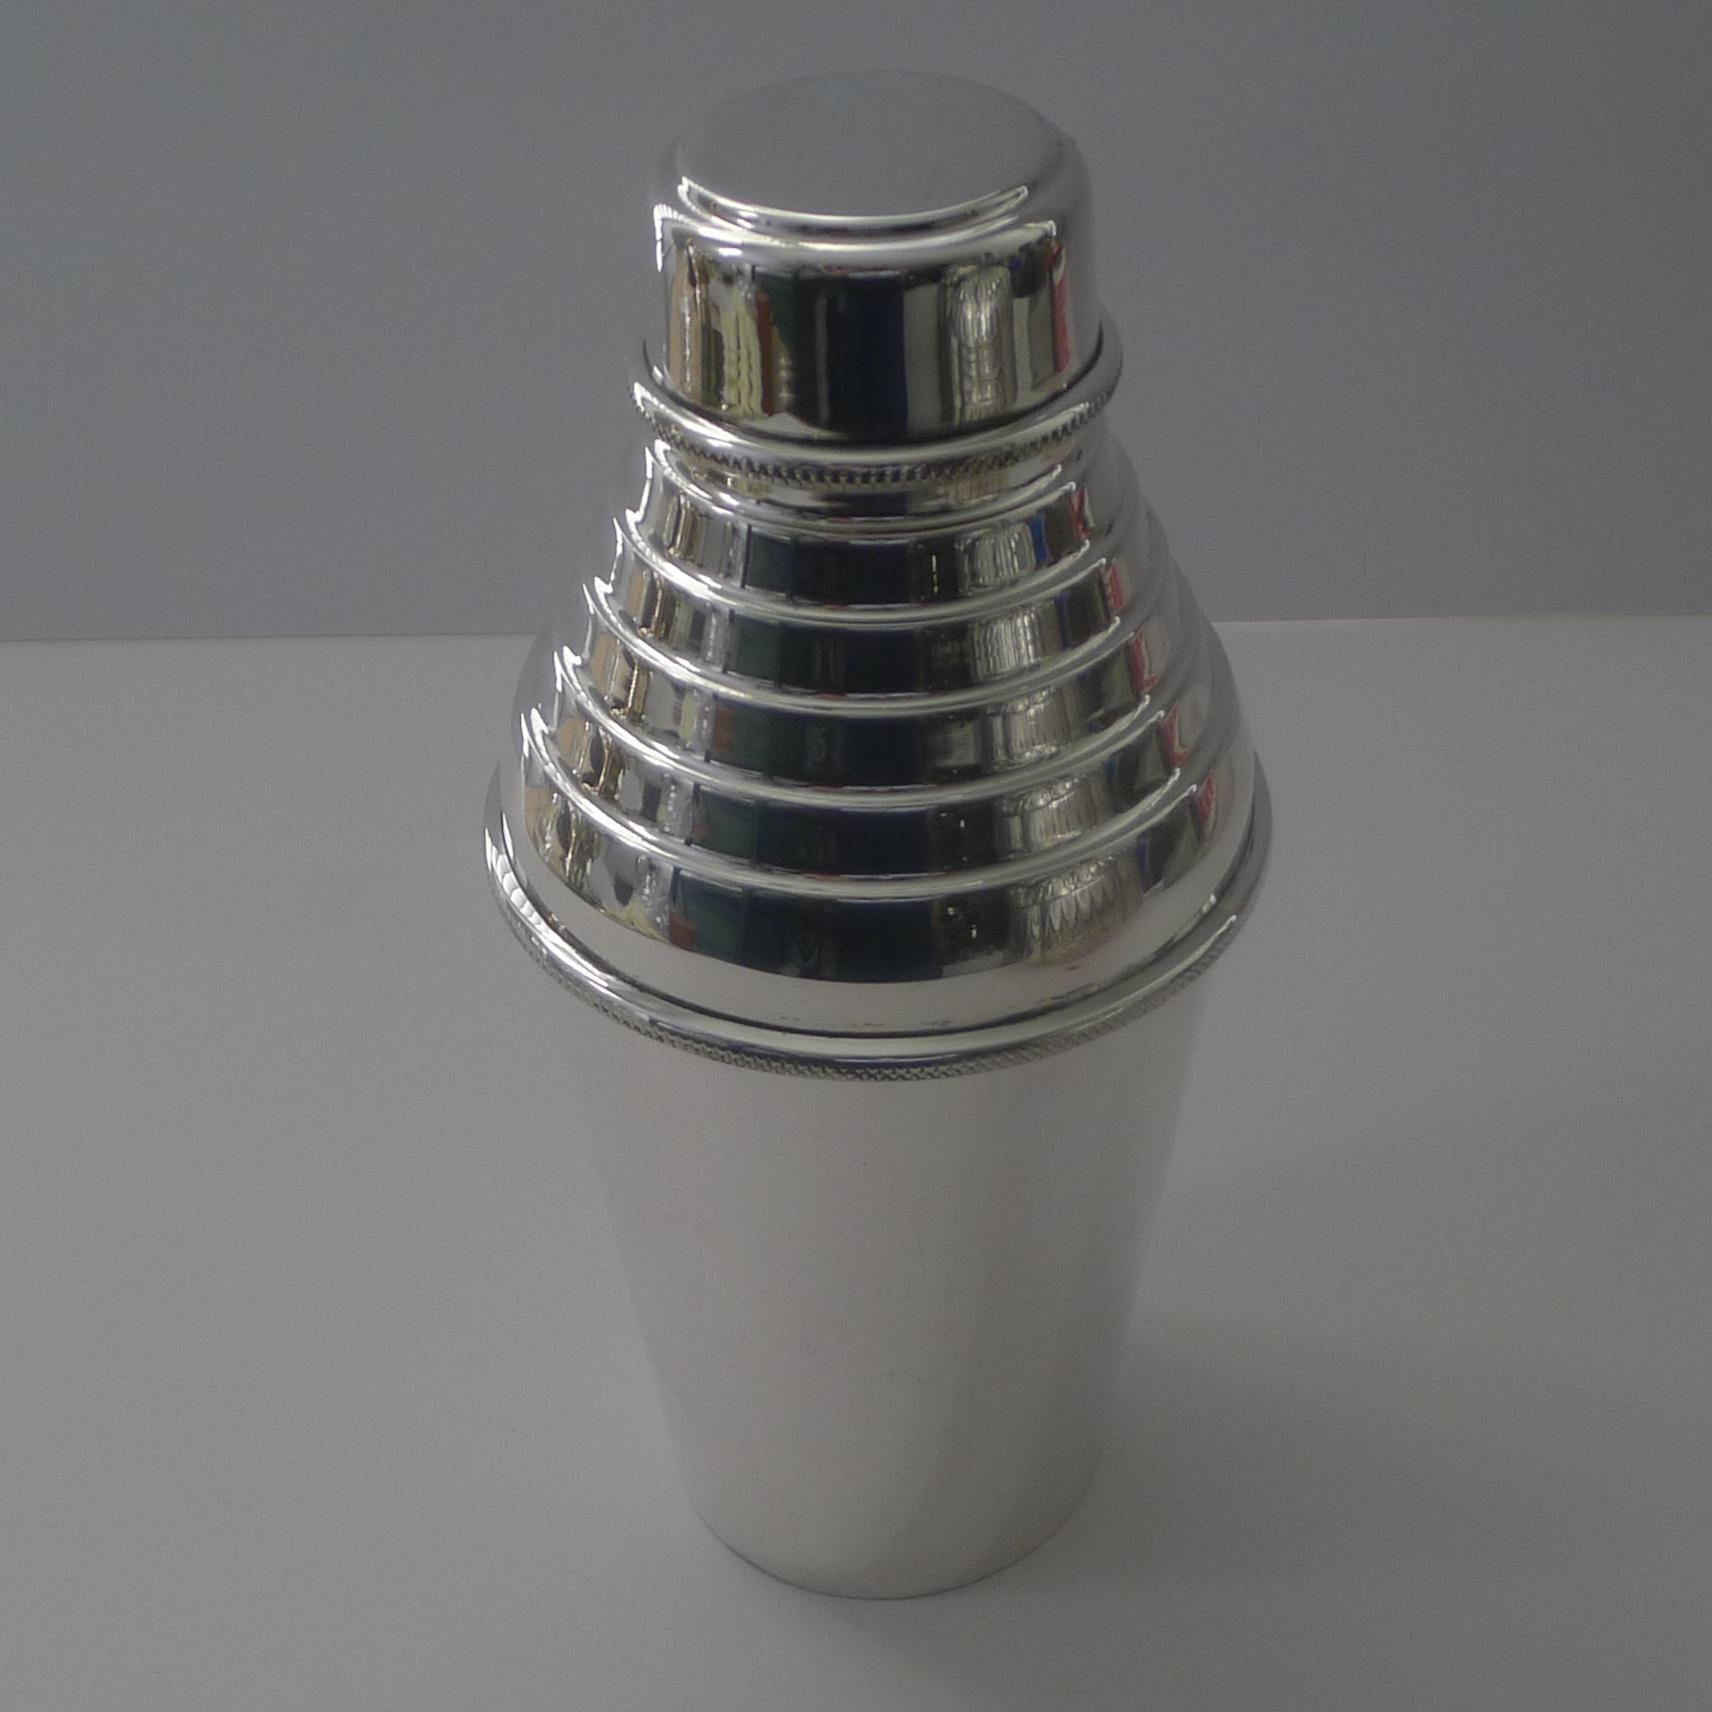 A stunning and stylish cocktail shaker by the highly sought-after and collectable silversmiths, Hukin & Heath, fully marked on the underside.

Just back from our silversmiths workshop where it has been professionally cleaned and polished, restoring